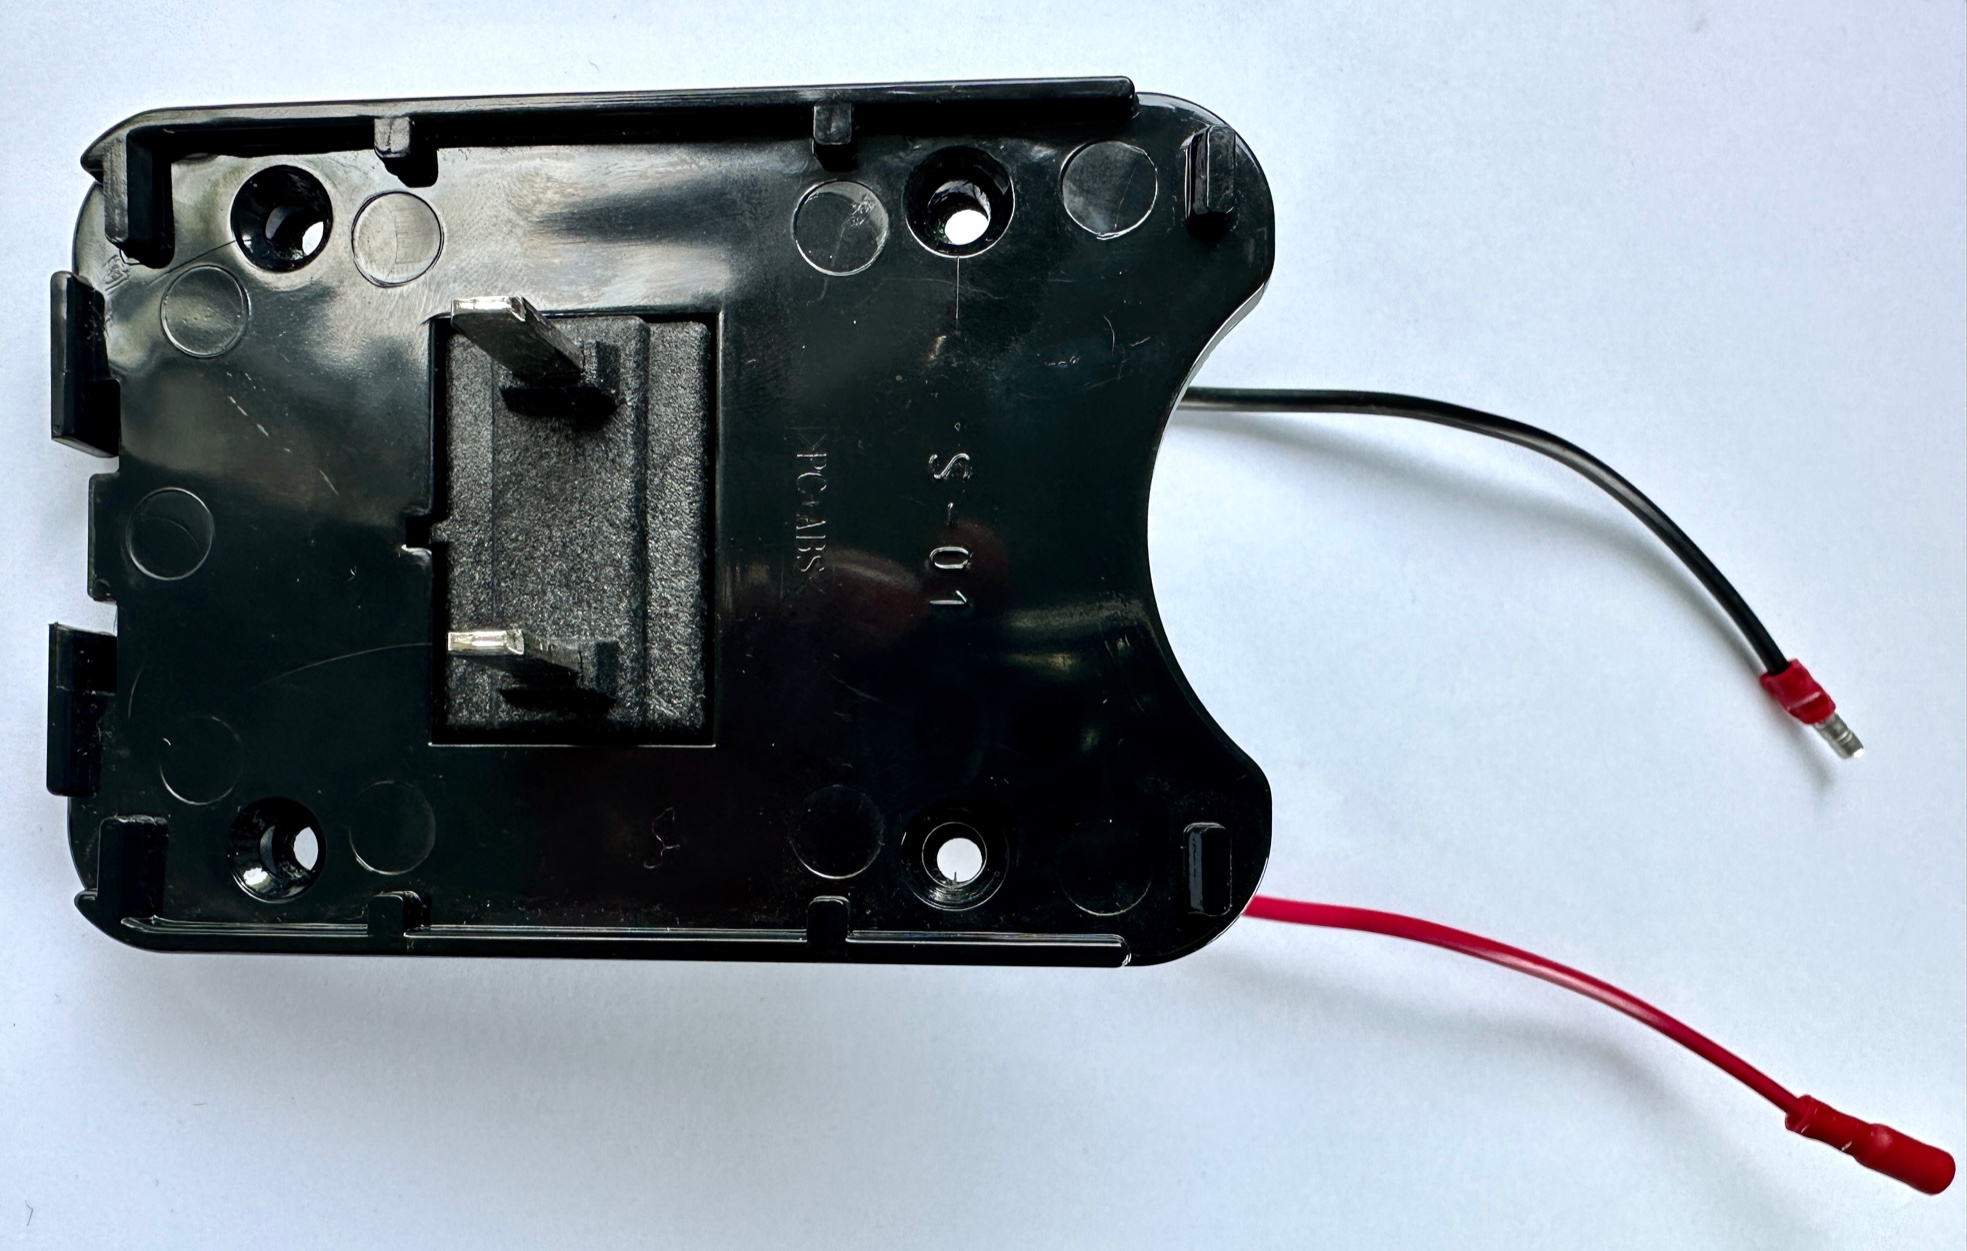 E-bike battery base plate with battery contacts